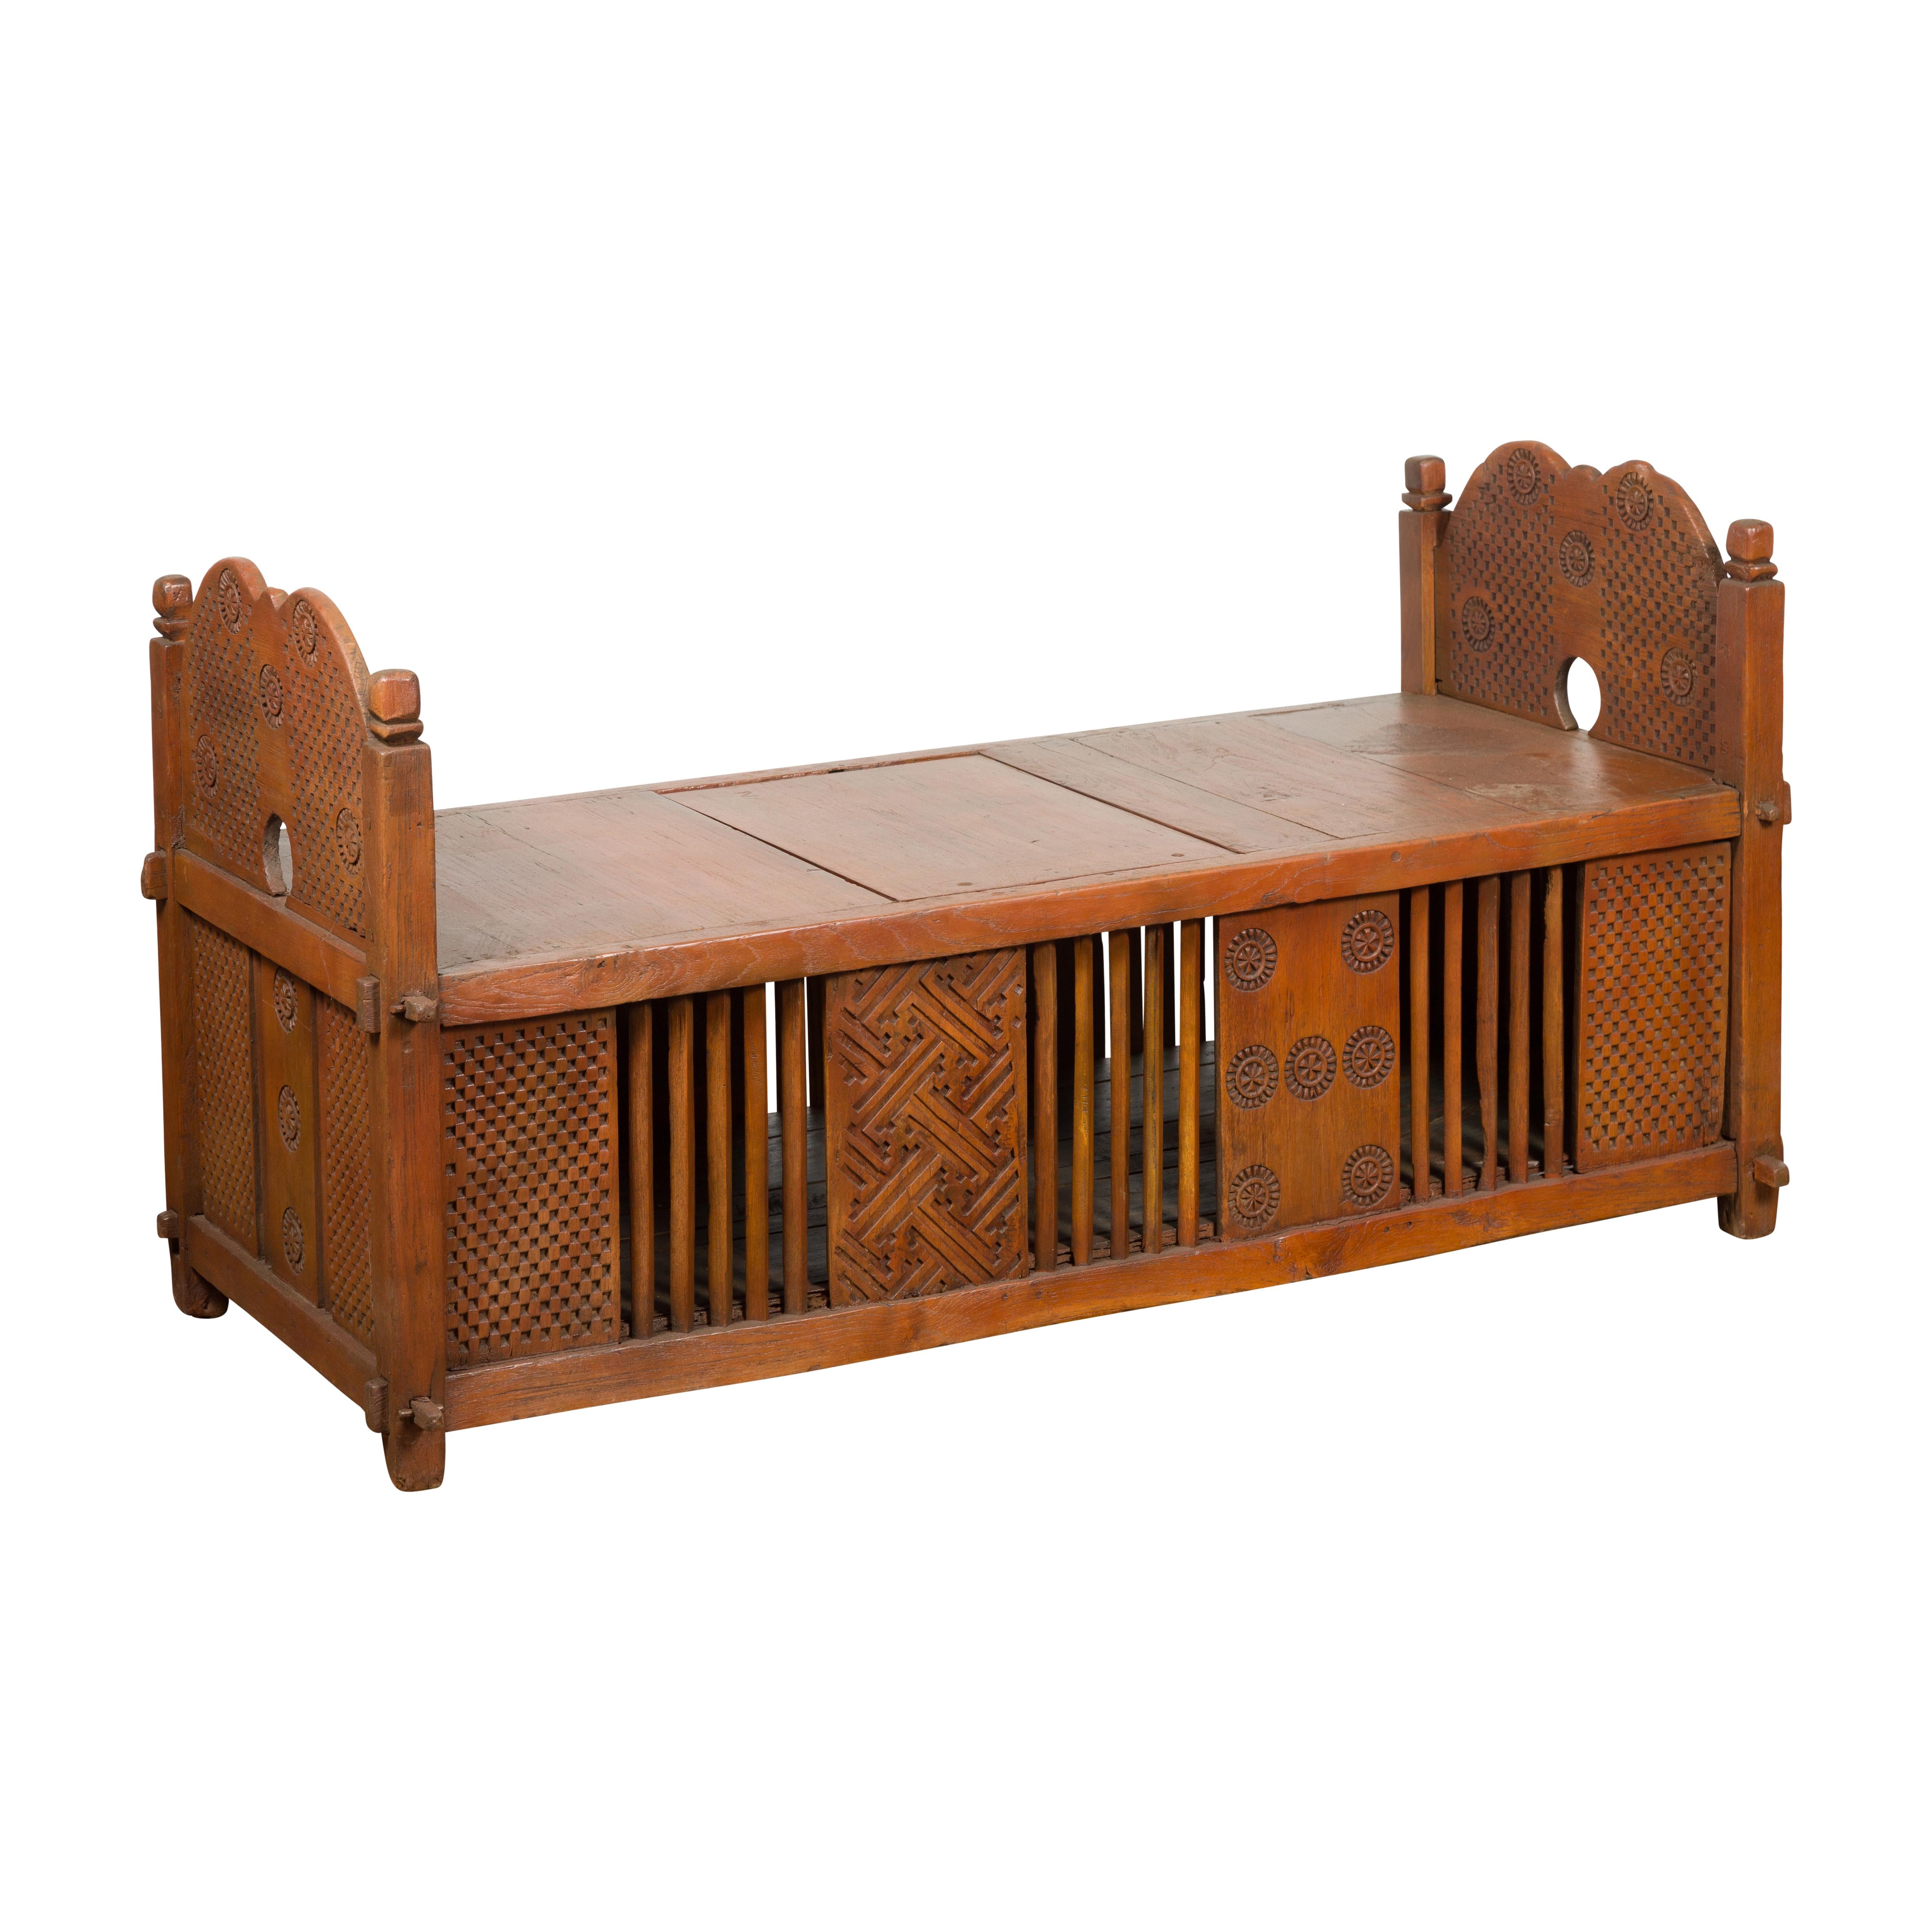 An antique Indian window bench from the 19th century with internal storage space and carved geometric motifs alternating with slatted panels. Discover the captivating beauty of this antique Indian window bench from the 19th century. Crafted with